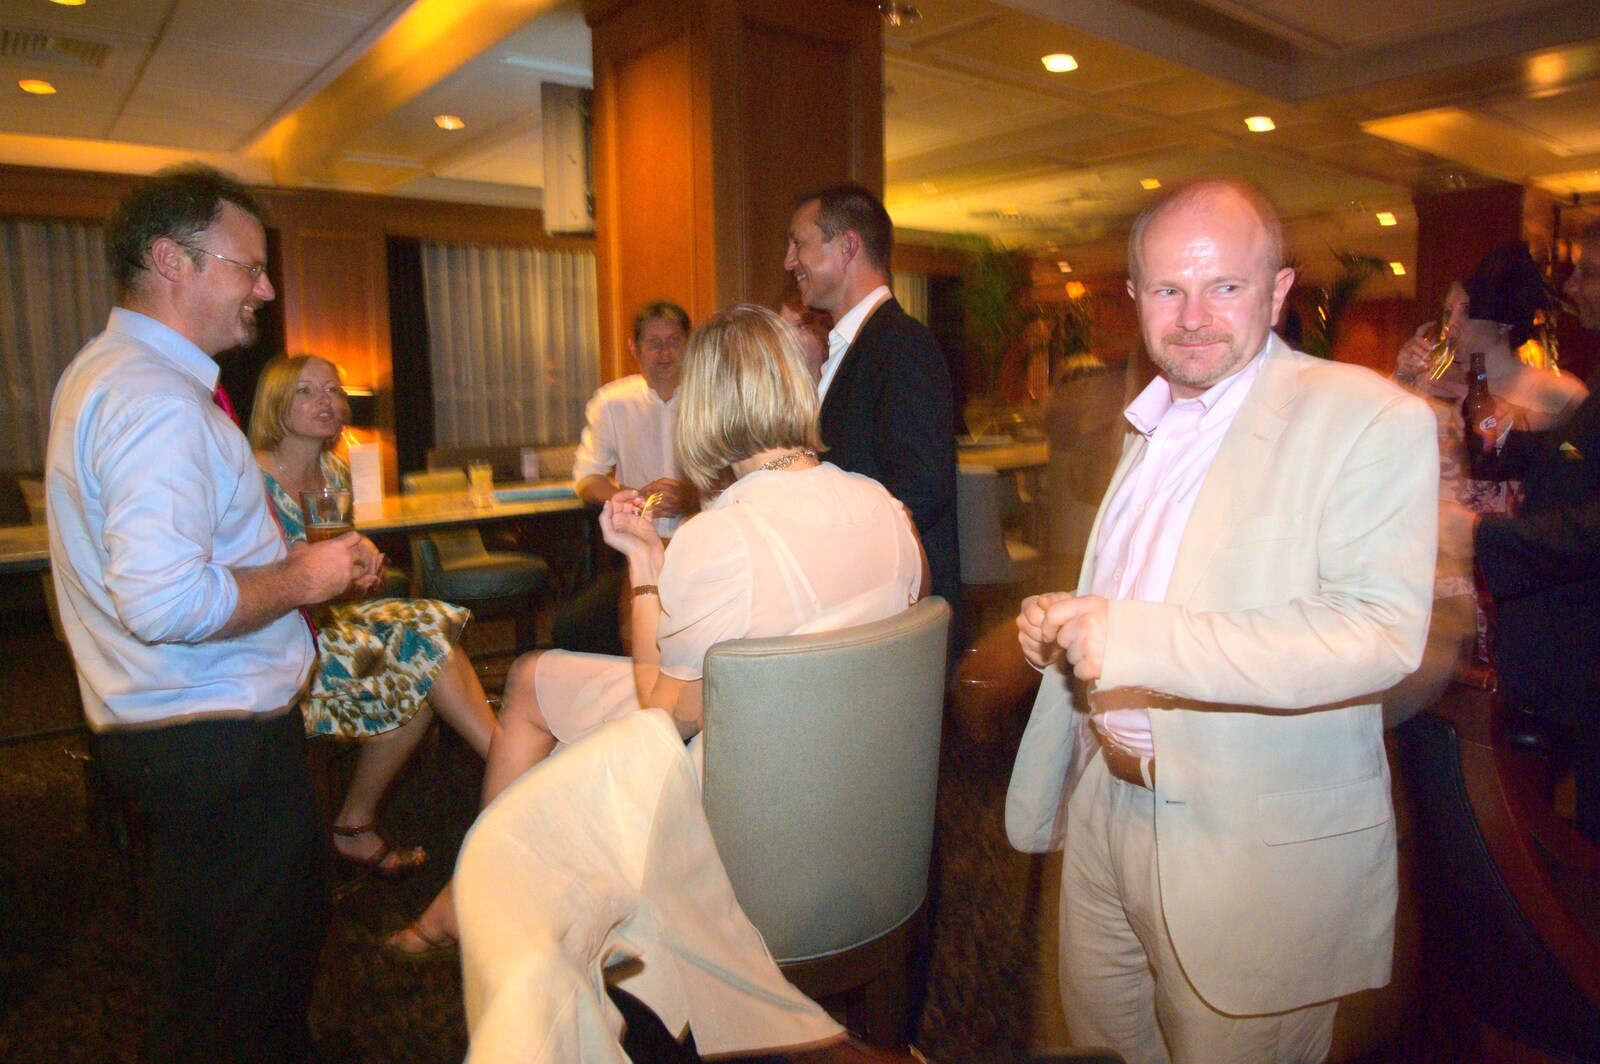 Hamish mills around back in the hotel bar from Phil and Tania's Wedding, Short Hills, New Jersey, USA - 20th August 2011